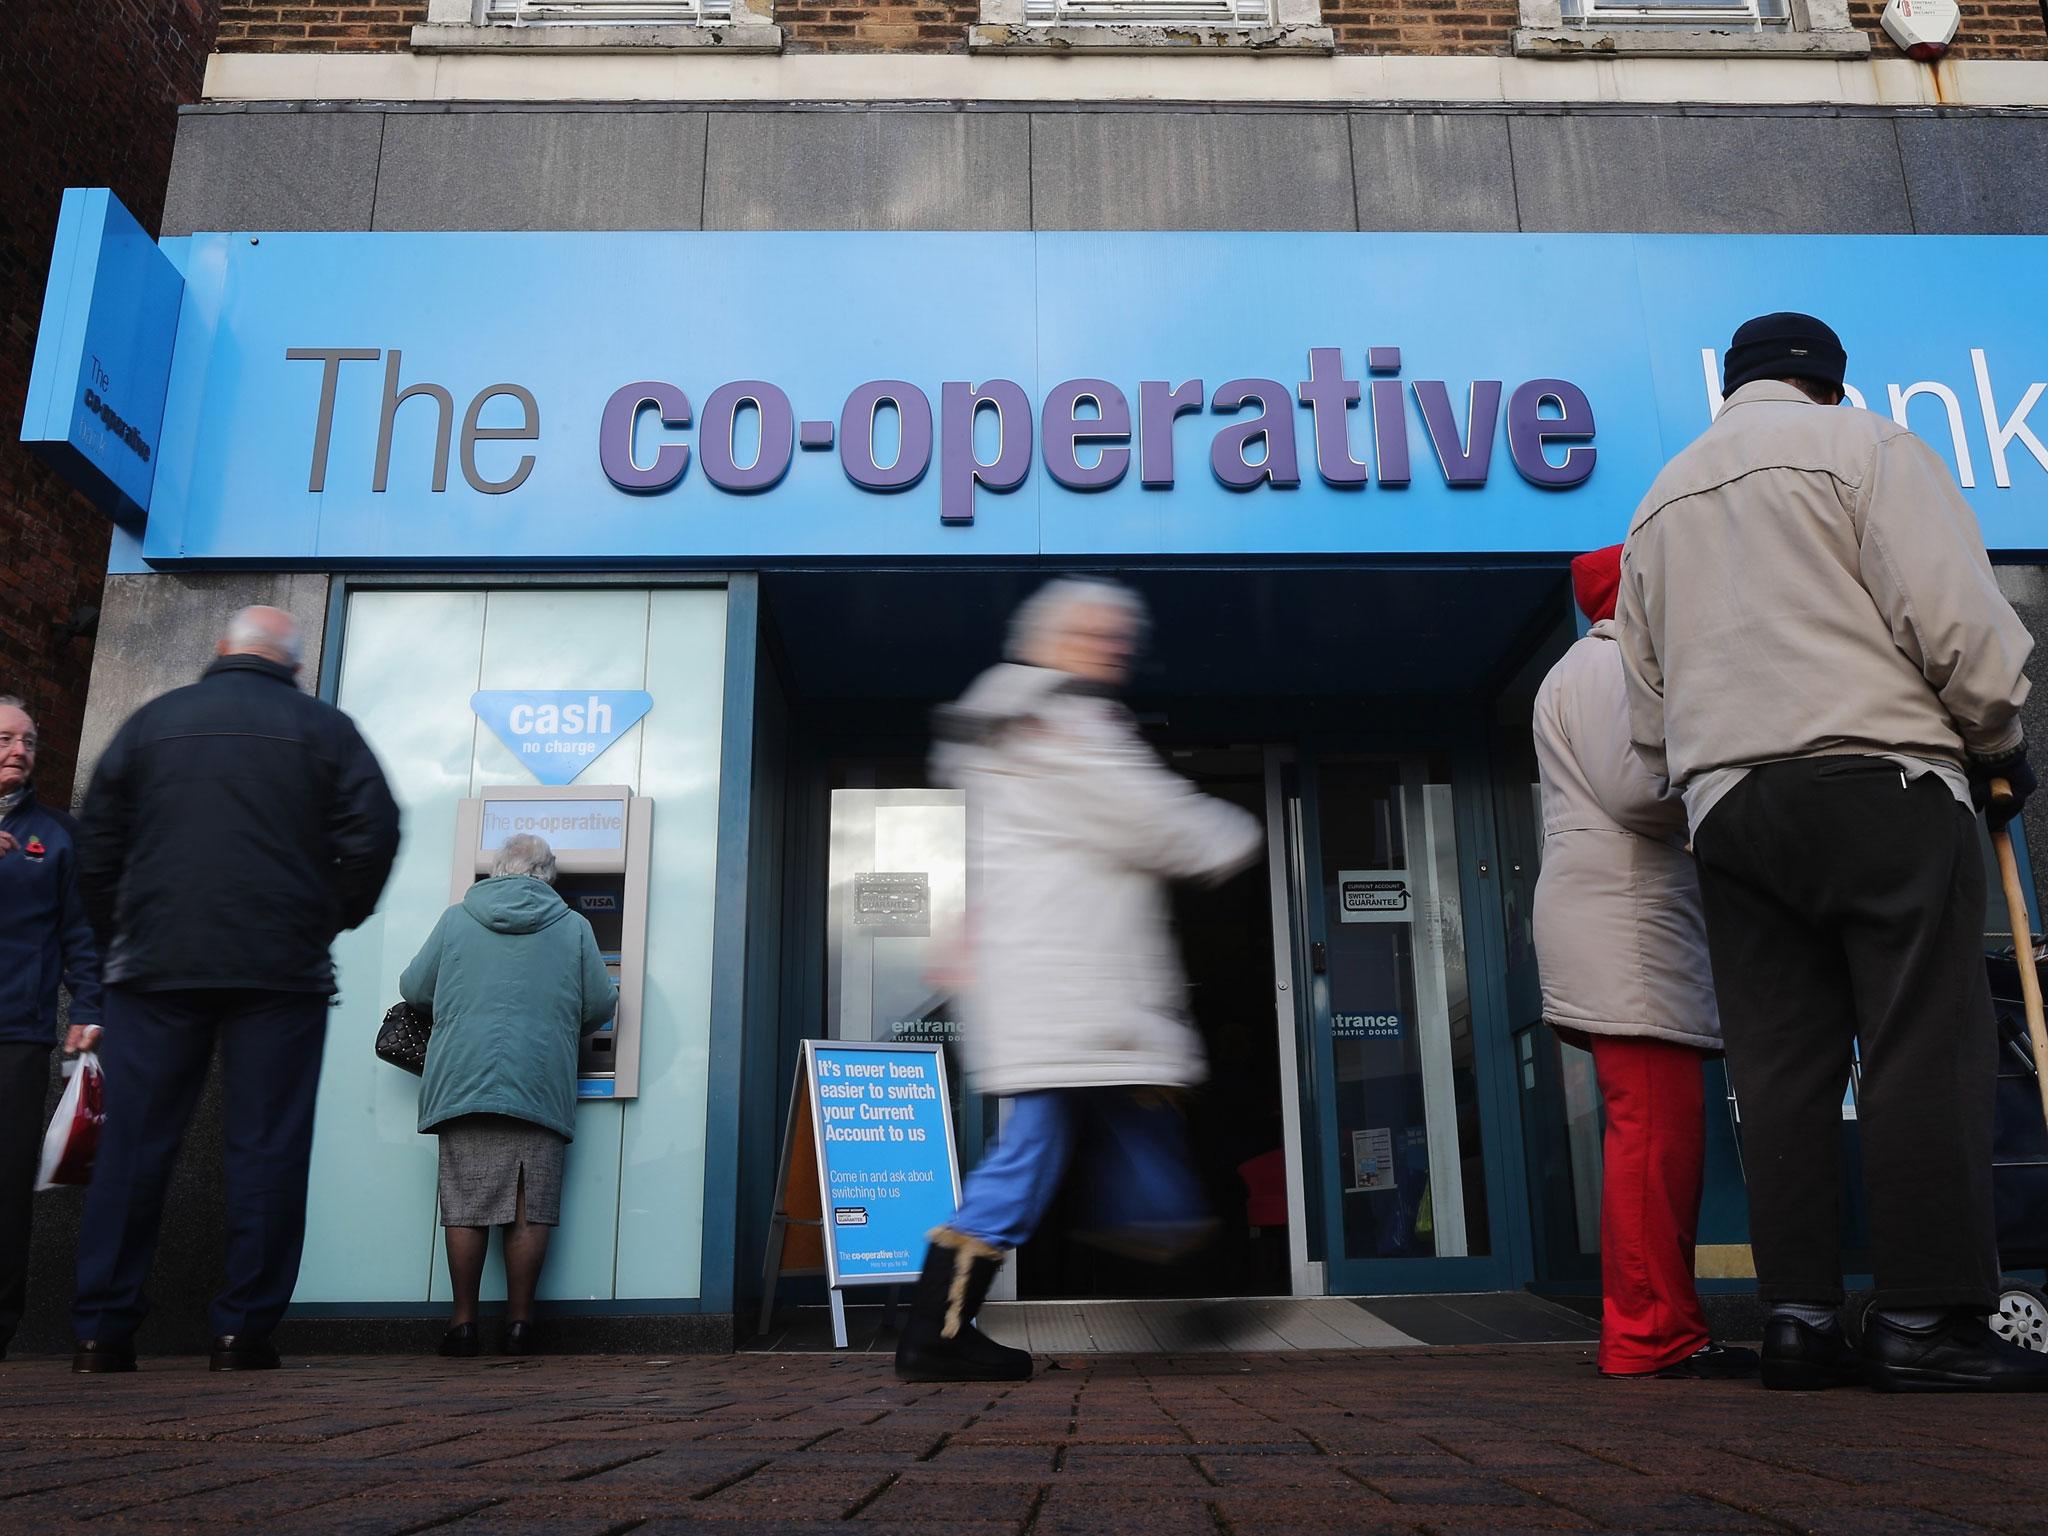 George Osborne has defended the Government's involvement in plans for the Co-operative Bank